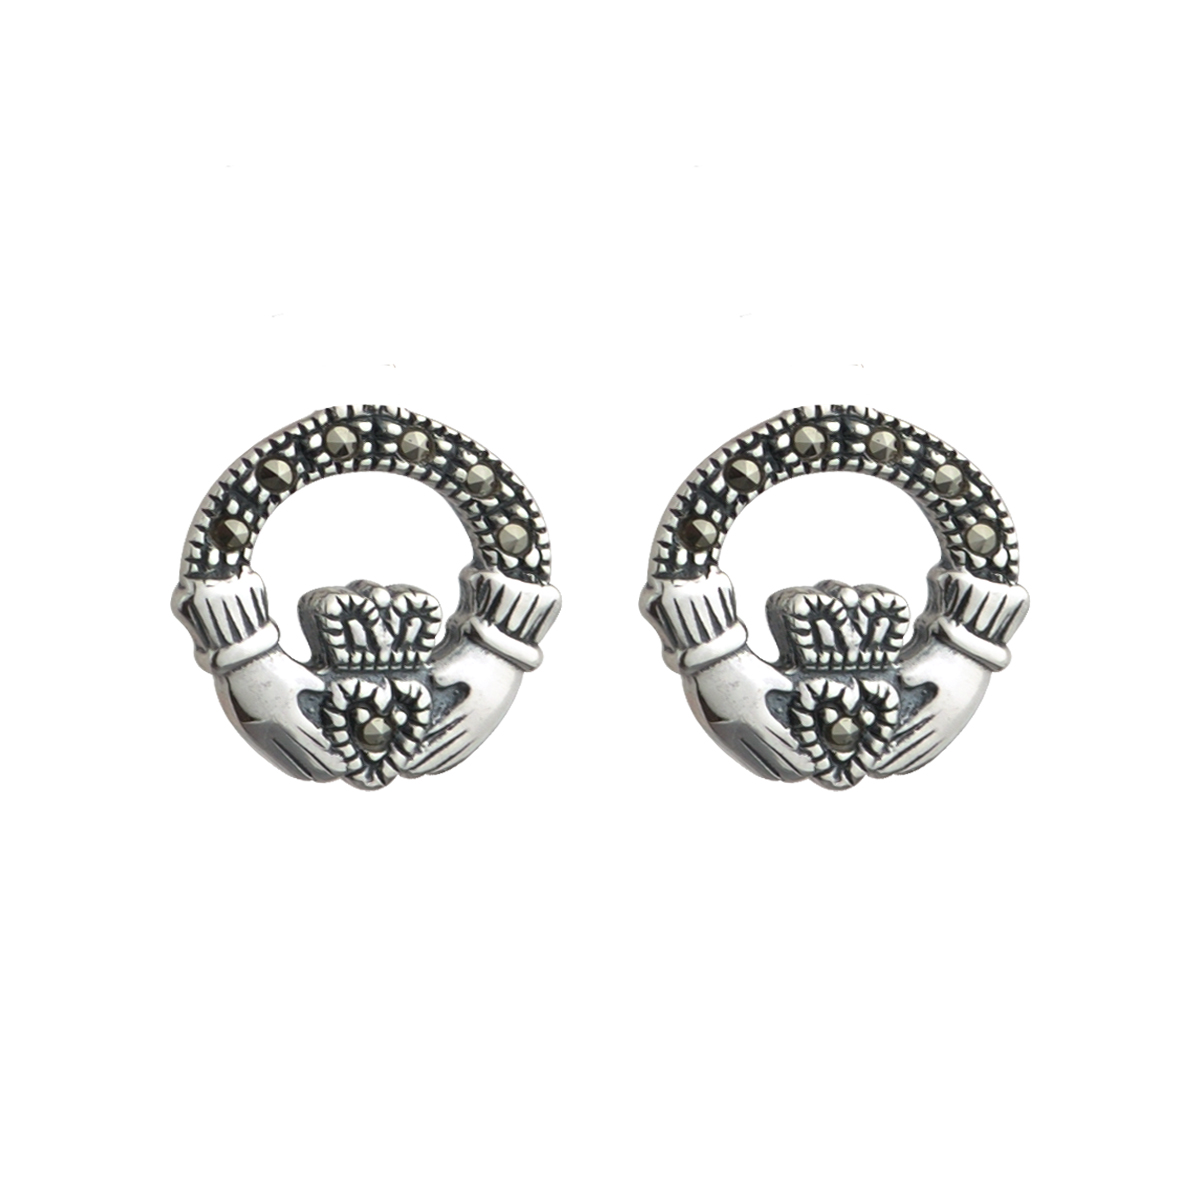 Product image for Sterling Silver Marcasite Claddagh Earrings